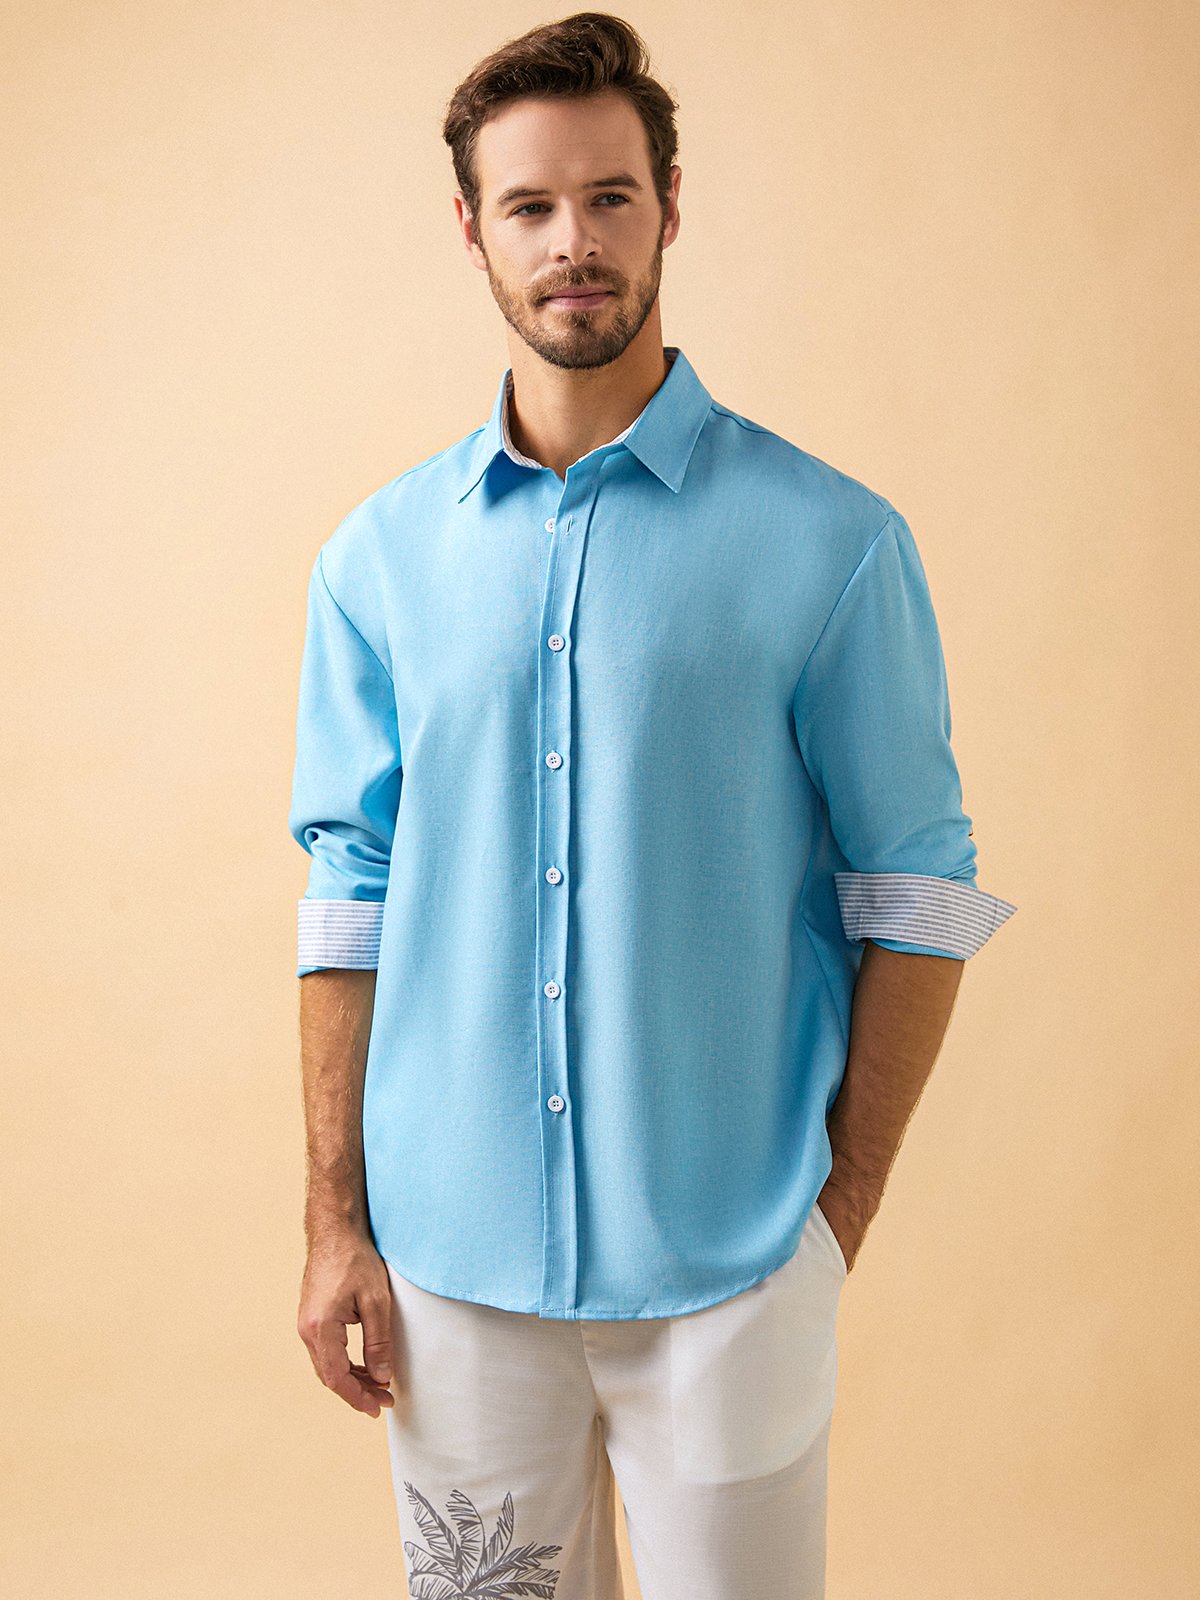 Hardaddy Cotton Color-block Long Sleeve Casual Shirt